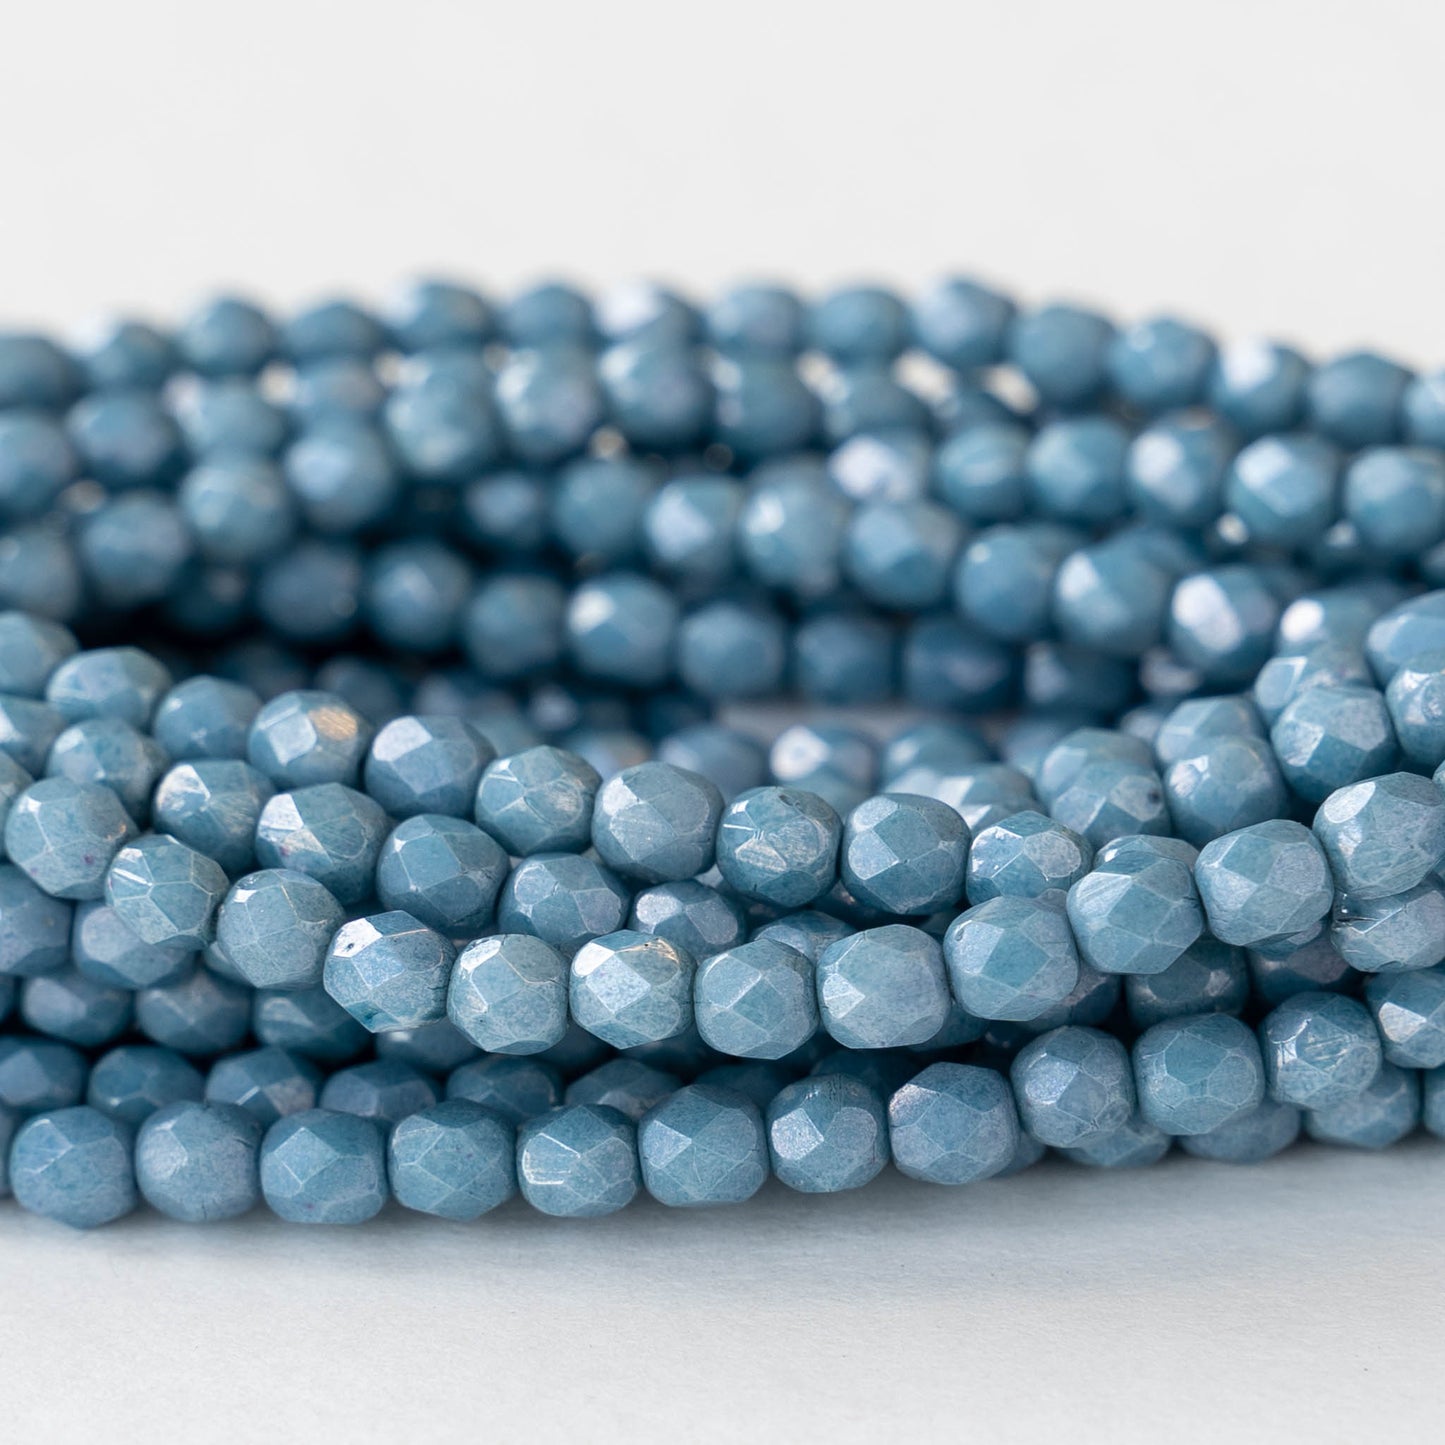 Load image into Gallery viewer, 4mm Round Firepolished Beads - Slate Blue Luster - 50 Beads
